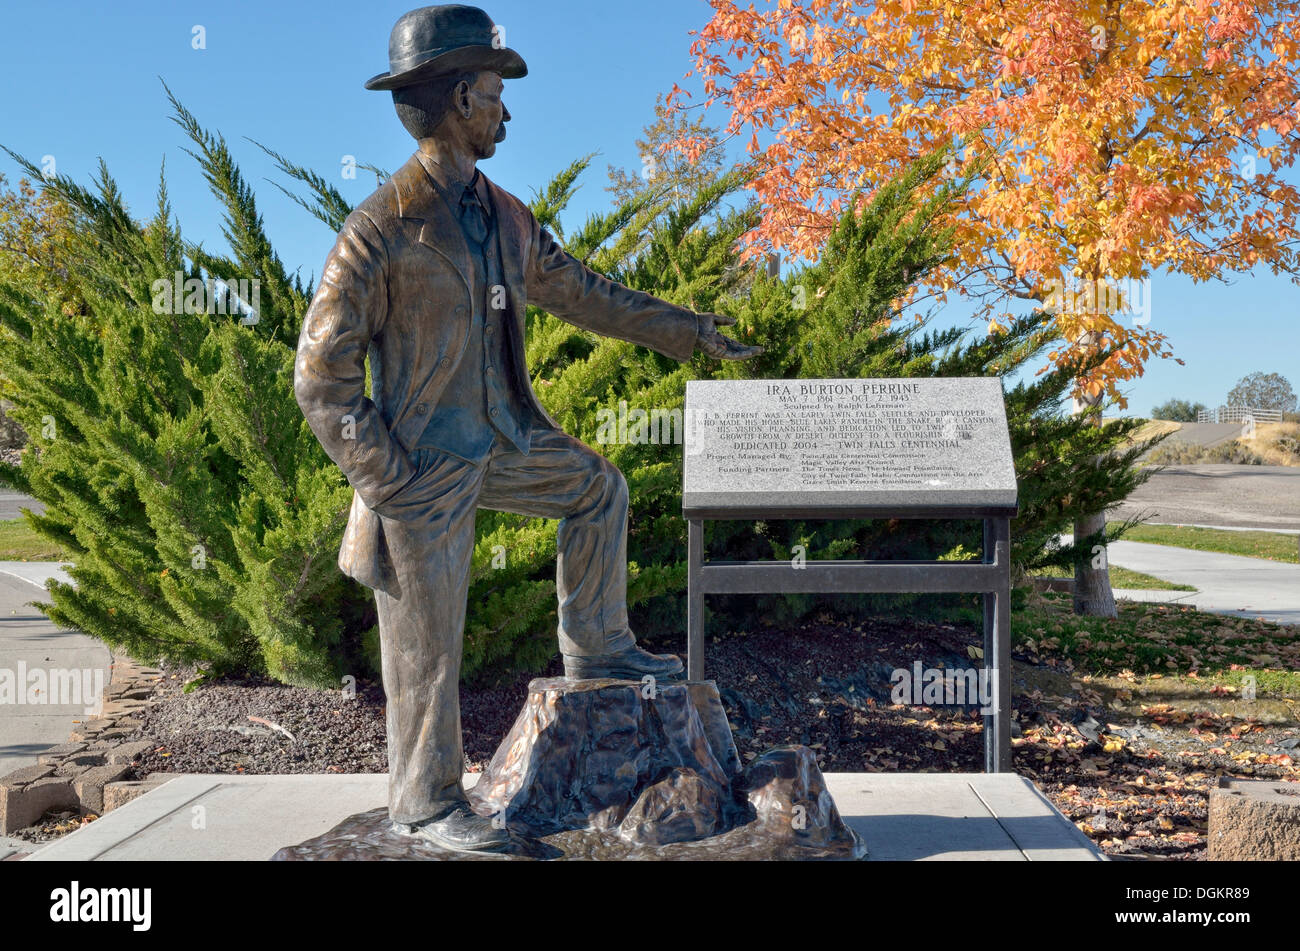 Bronze statue for I.B. Perrine by Ralph Lehrman, for merits of the settler in relation to the city of Twin Falls, Idaho, USA Stock Photo